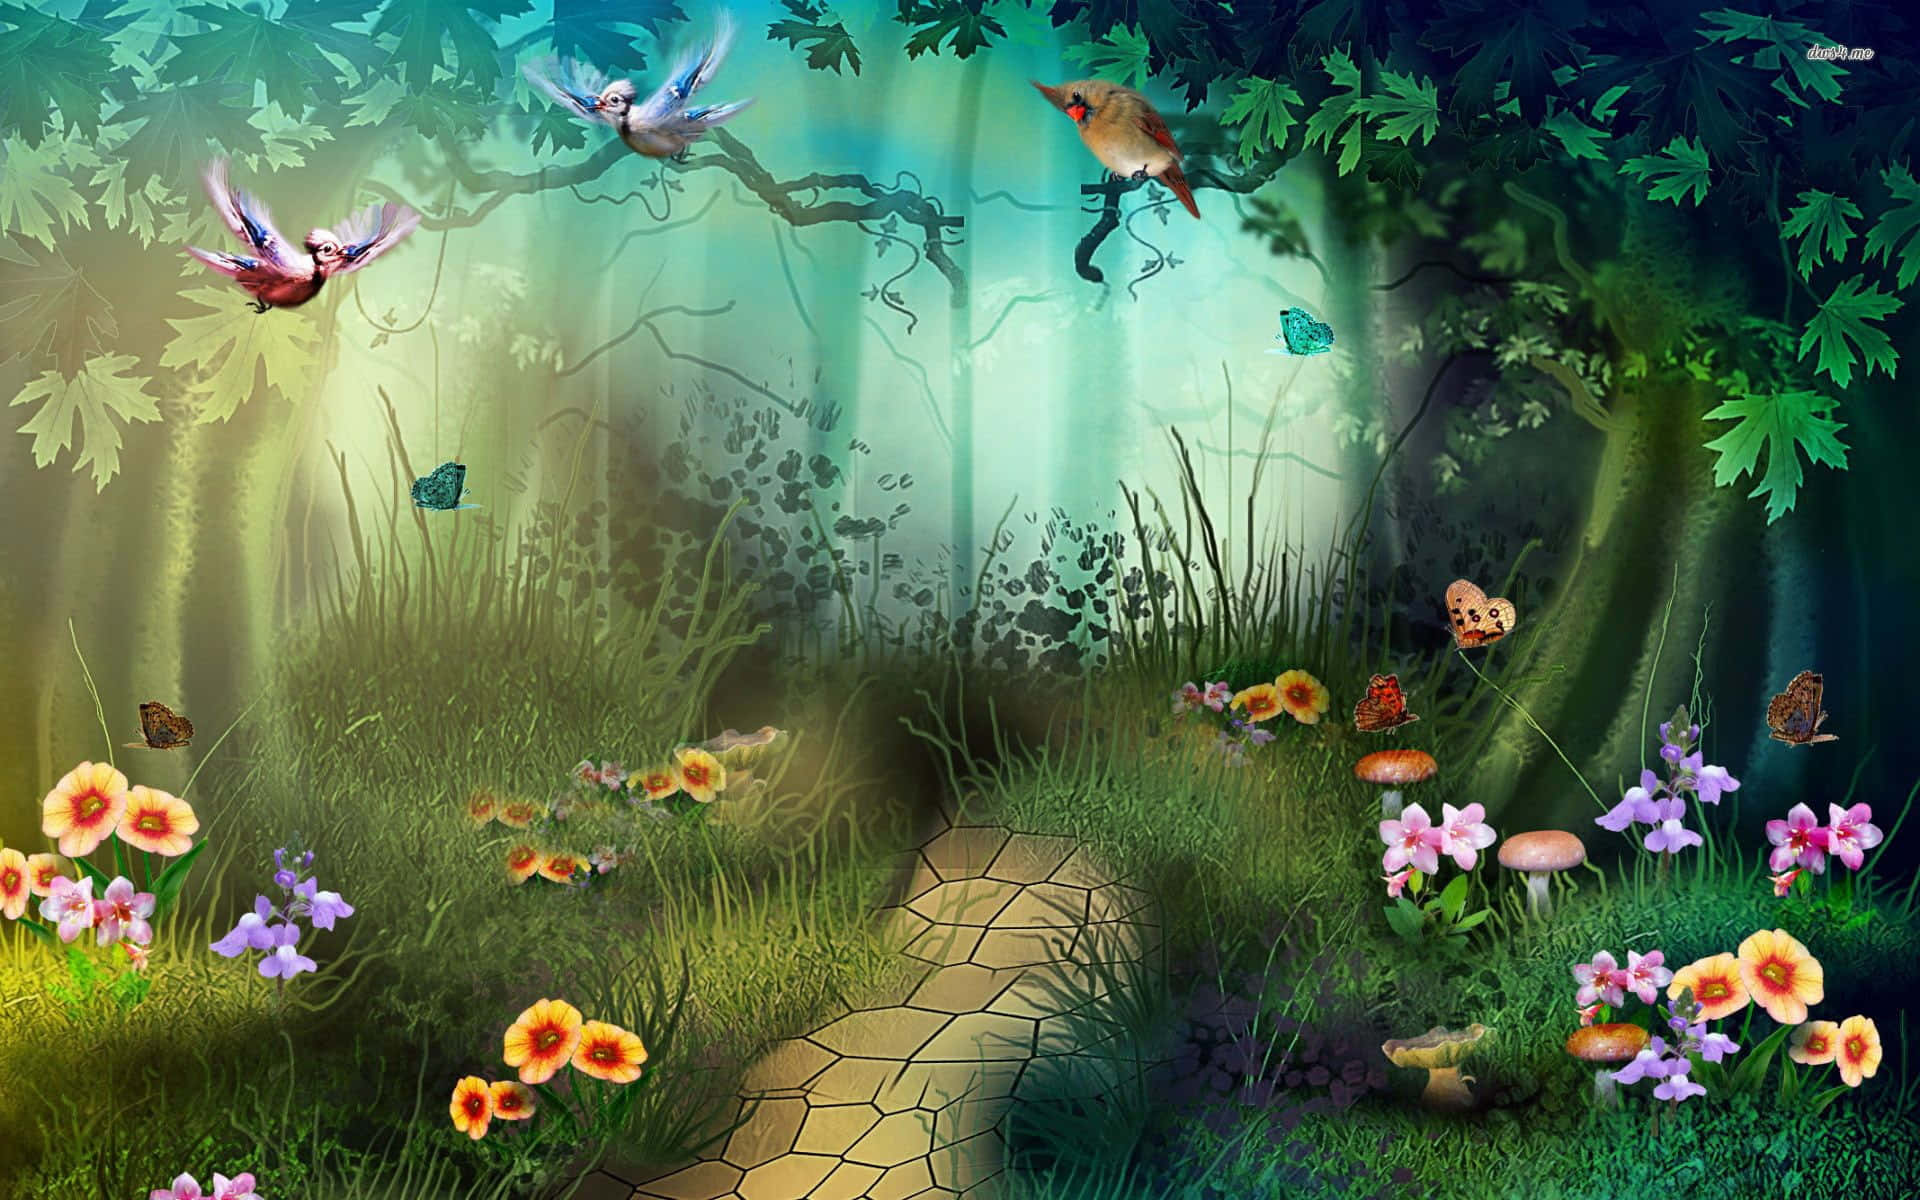 Magical Enchanted Forest Scene Wallpaper